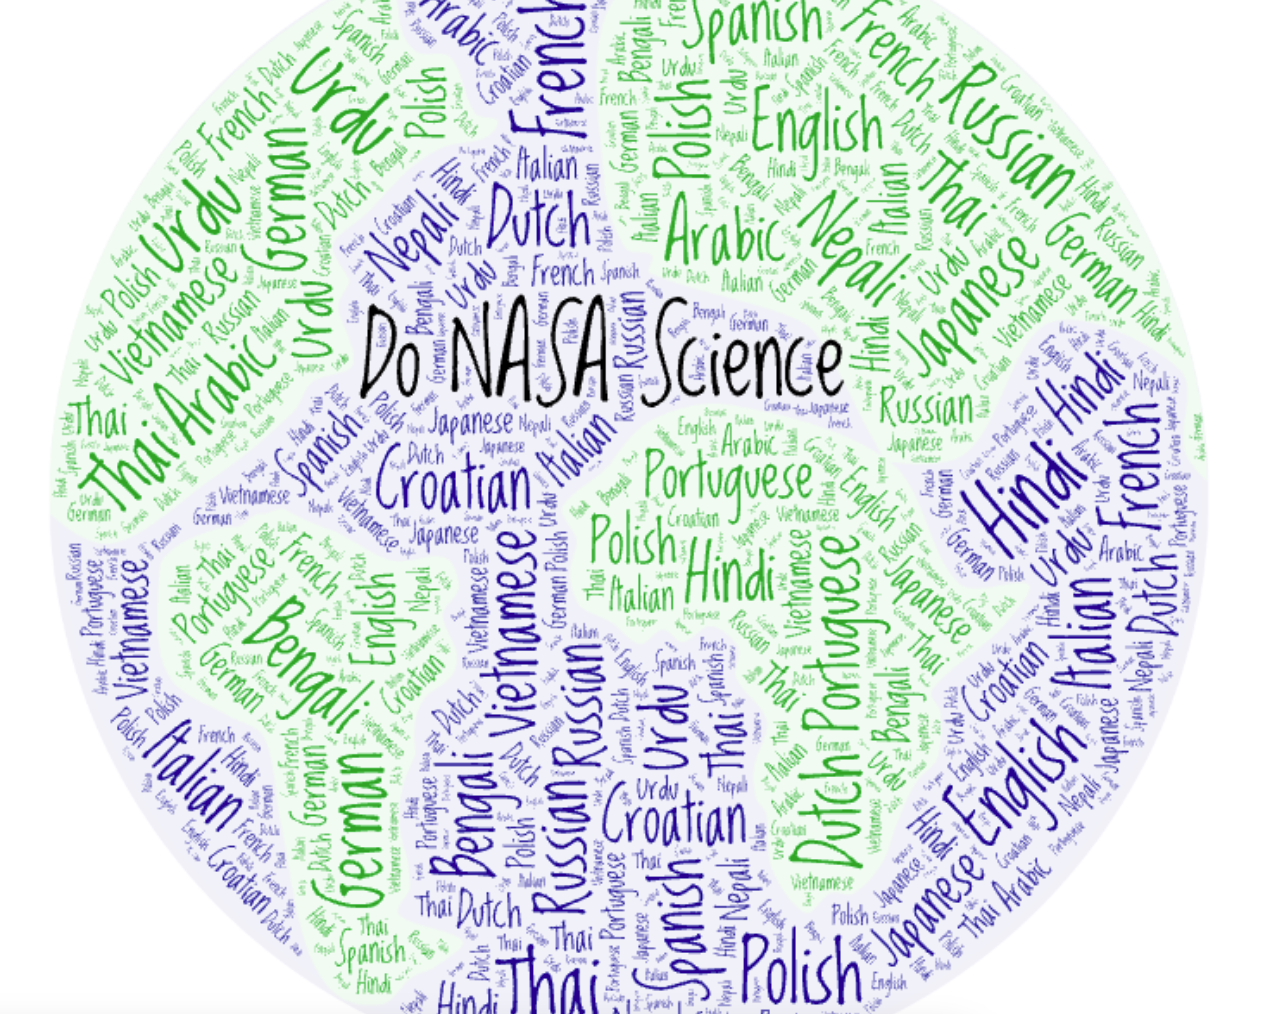 Earth-shaped word cloud made up of the many languages in which NASA Citizen Science projects are available, including Arabic, Bengali, Croatian, Dutch, French, German, Hindi, Italian, Japanese, Nepali, Polish, Portuguese, Spanish, Russian, Thai, Urdu, and Vietnamese. In the center of the word cloud, the words Do NASA Science are prominent.